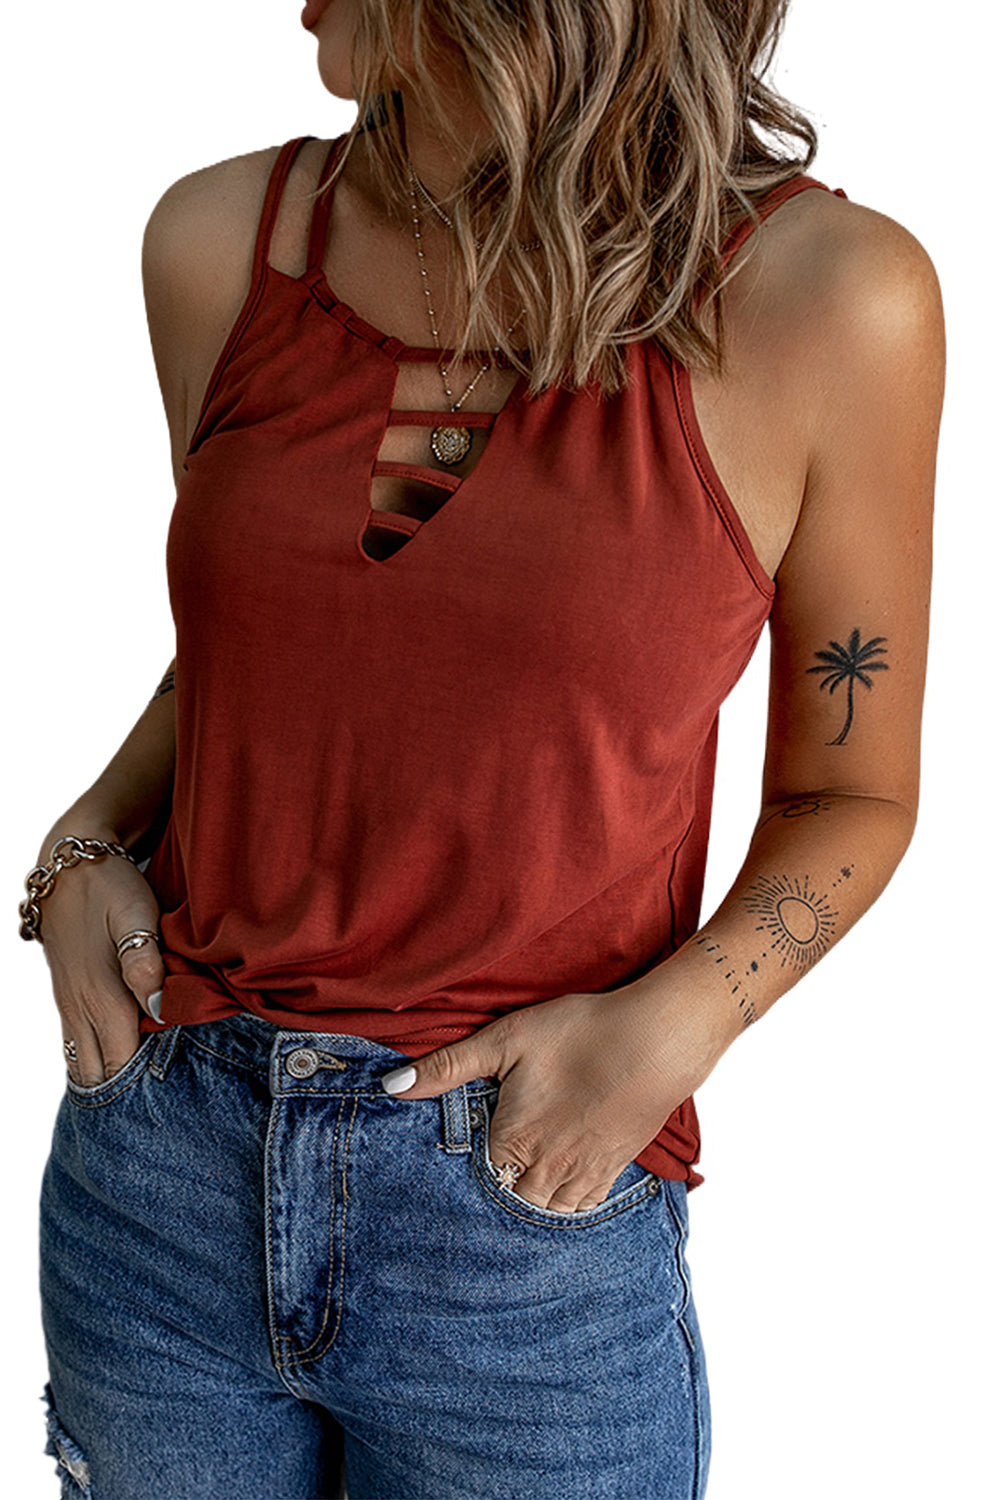 Wine Red Ladder Hollow out Tank Top